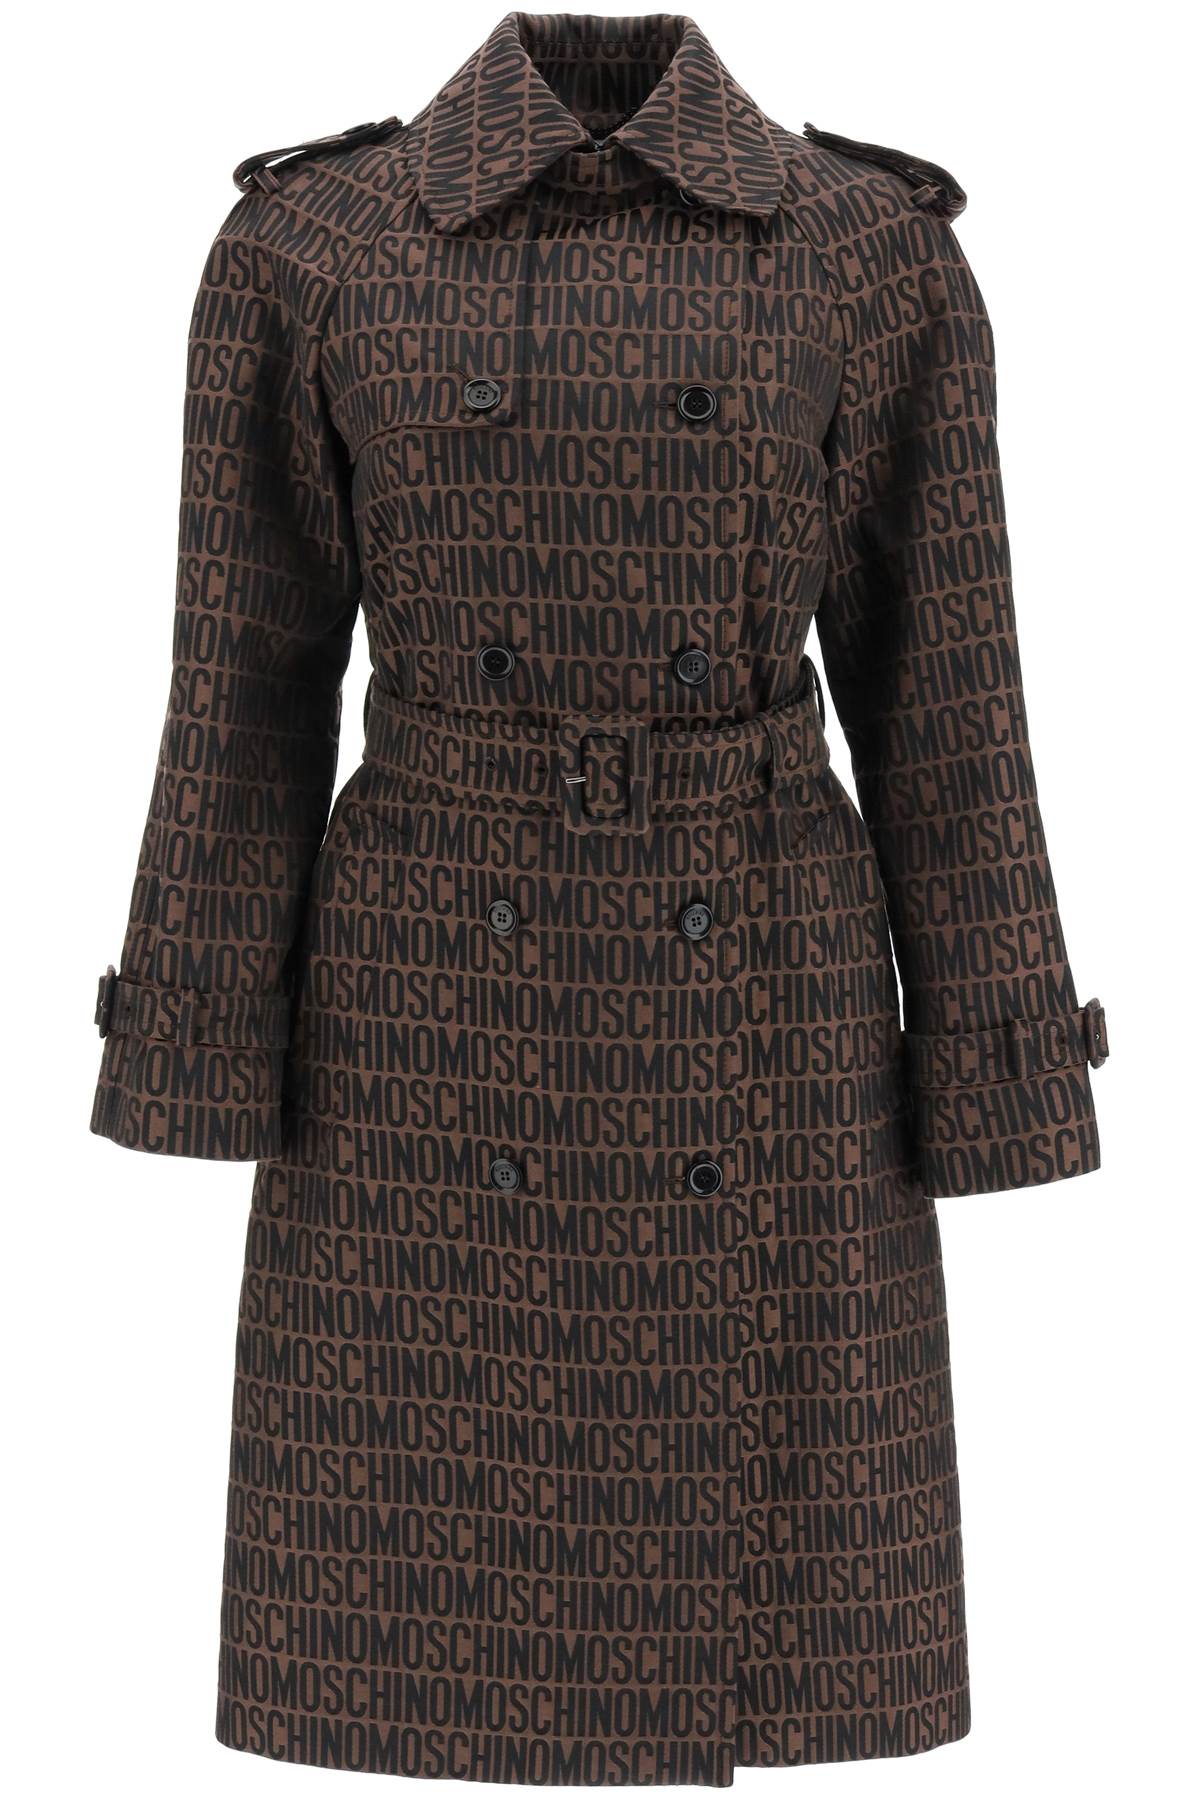 MOSCHINO ALL-OVER LOGO TRENCH COAT